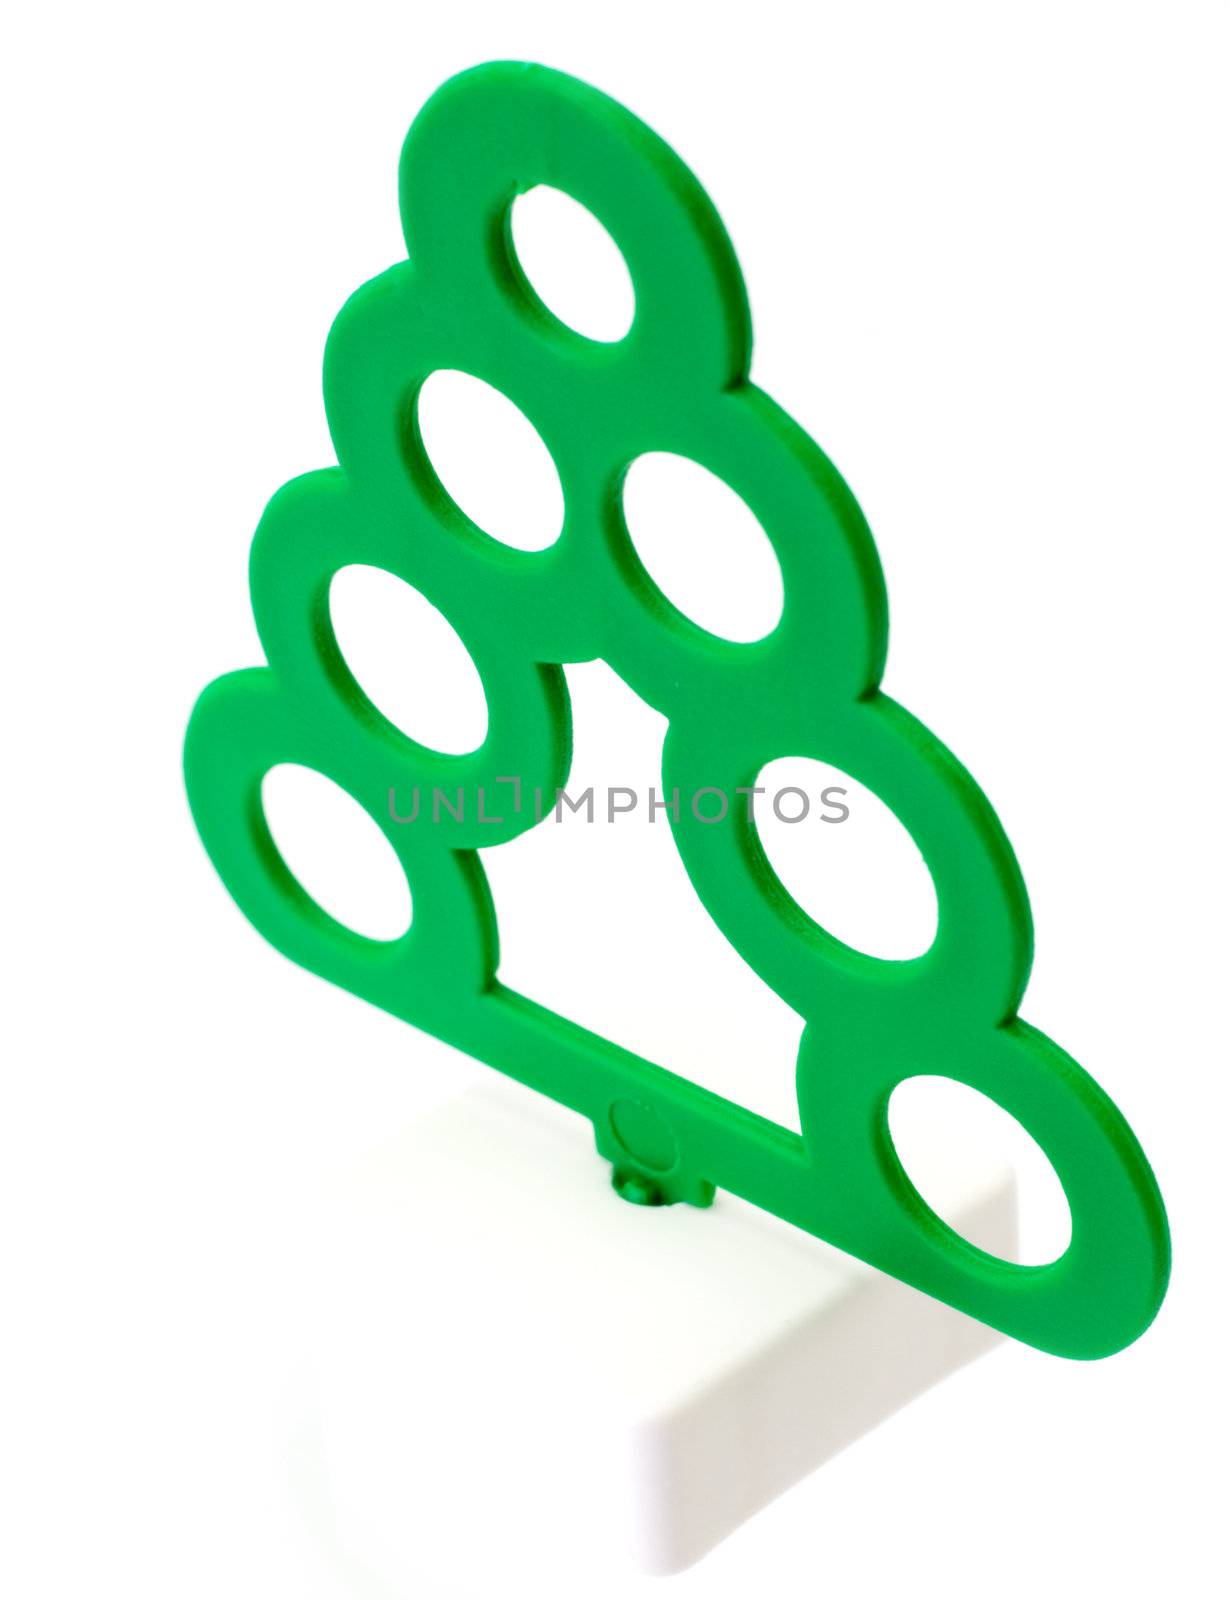 Toy plastic green tree on the white background